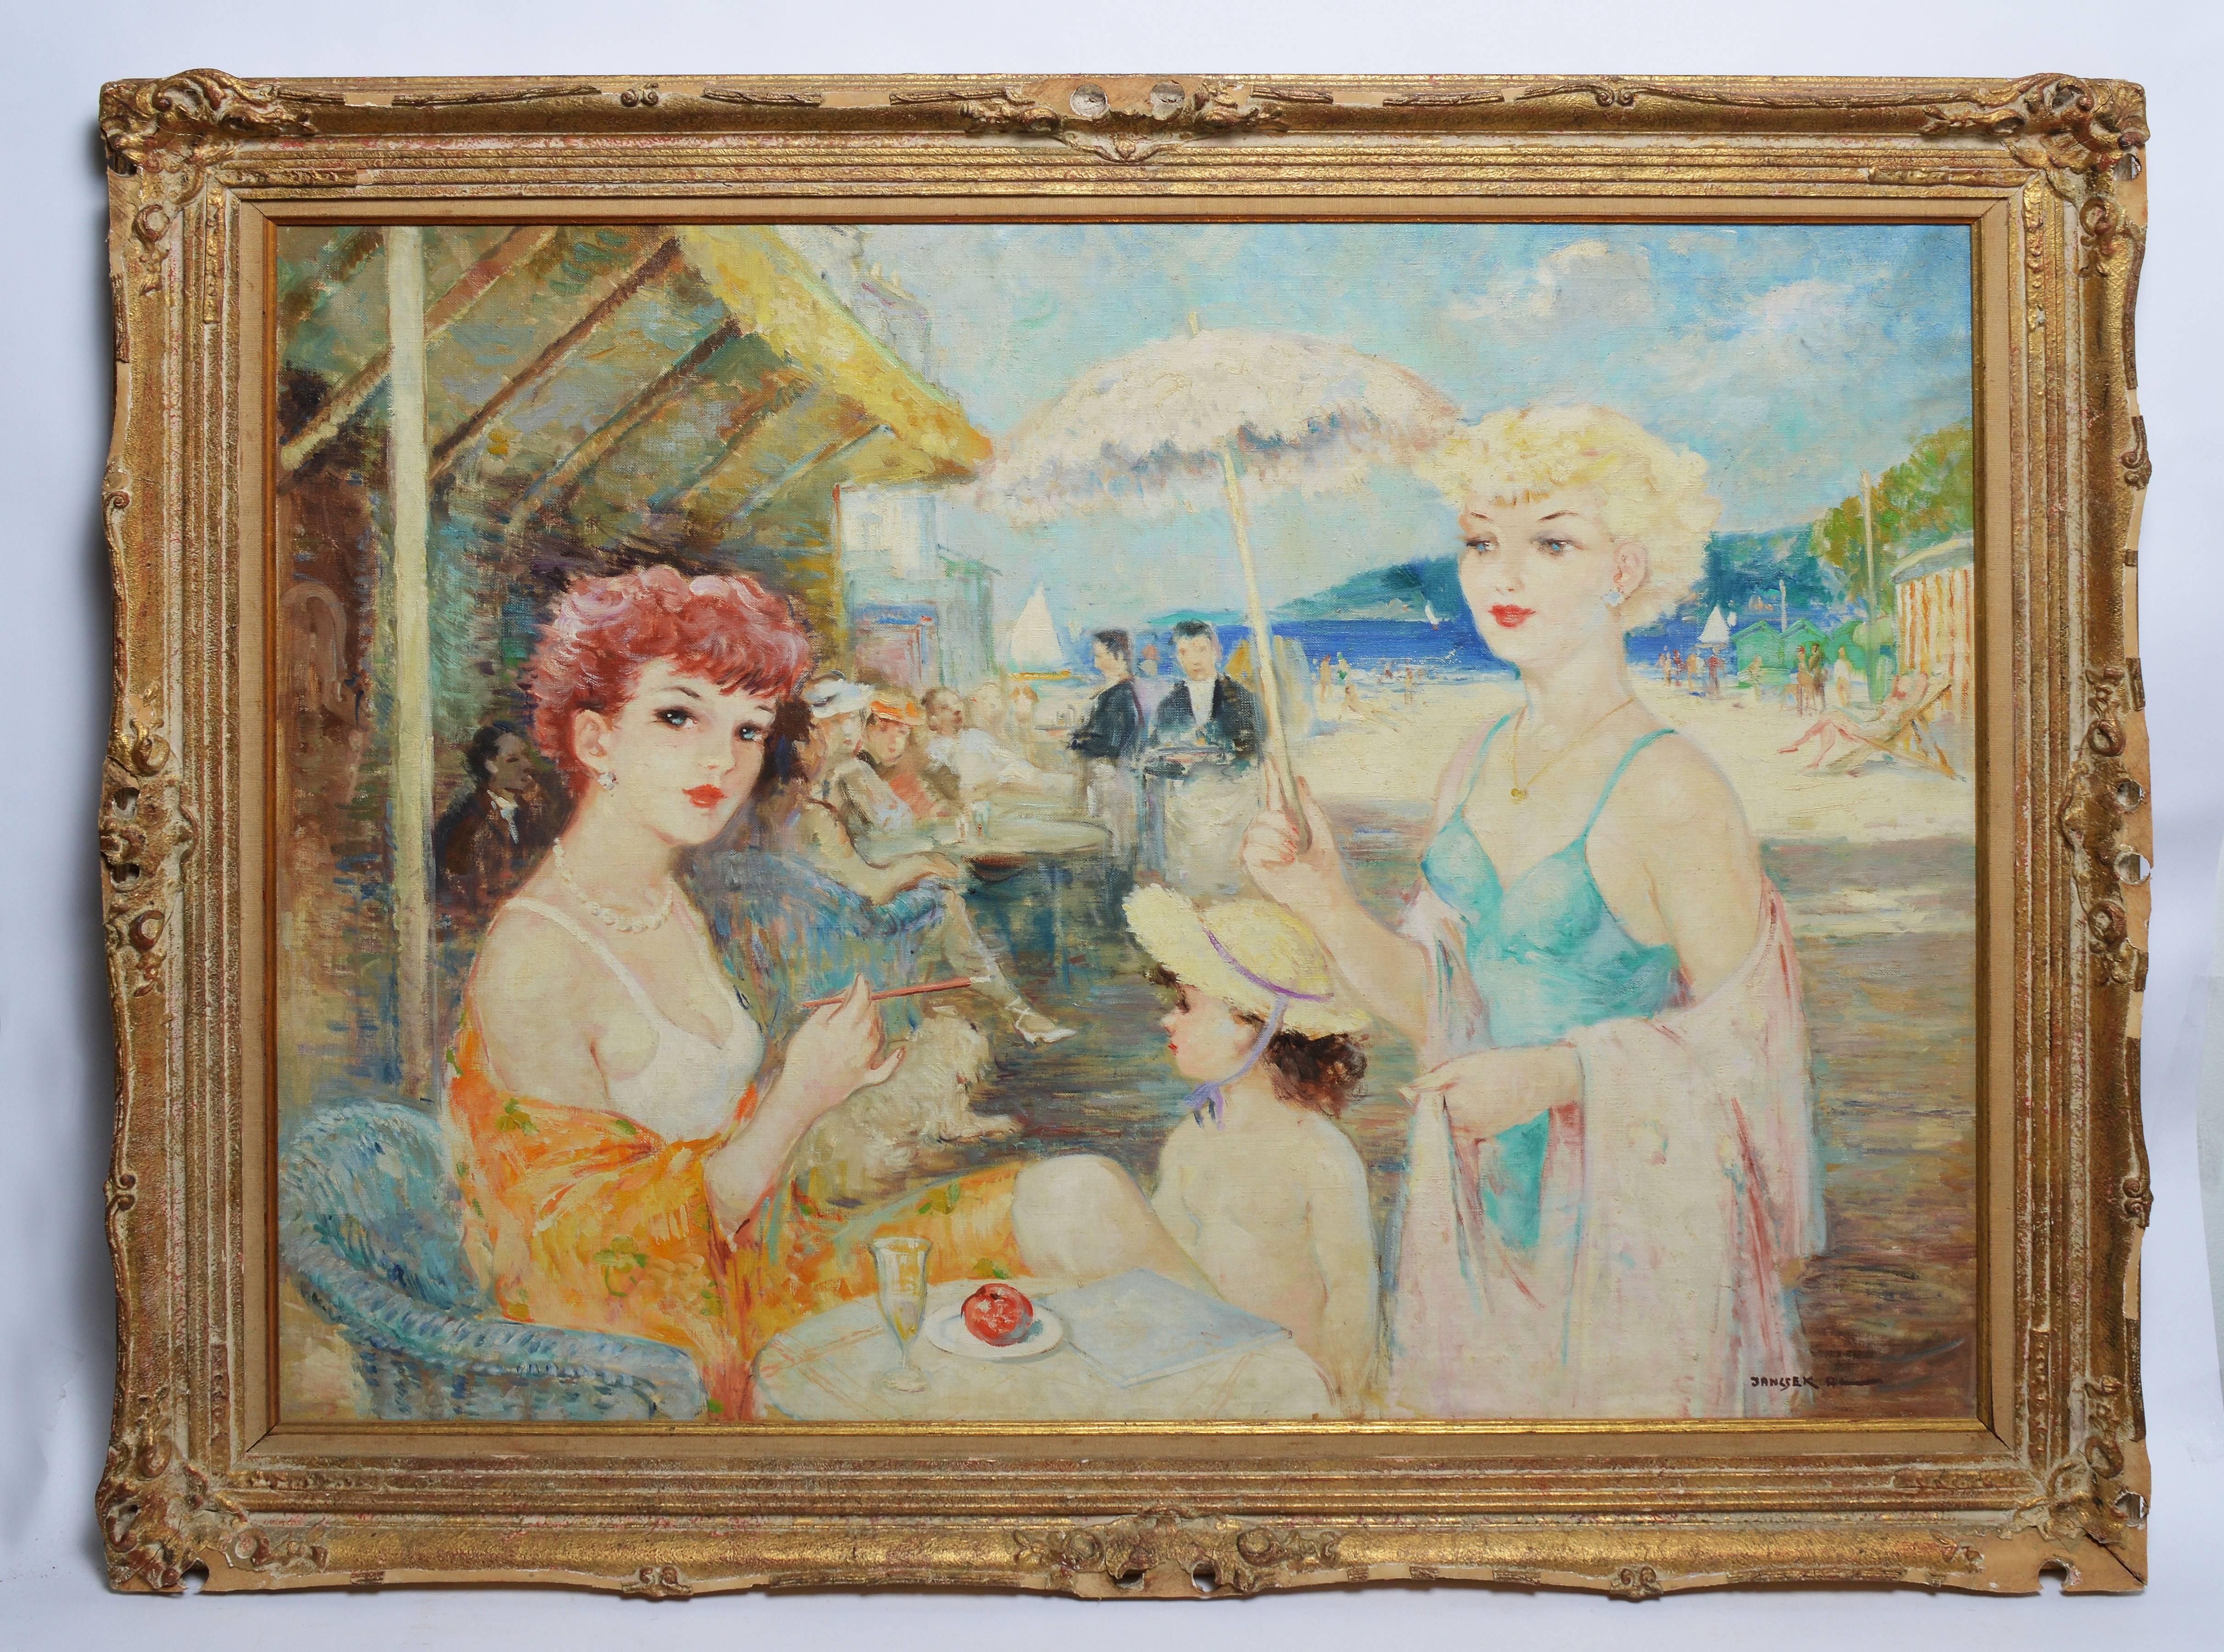 Large impressionist beach scene by Antal Jancsek (1907-1985).  Oil on canvas, circa 1940.  Signed lower right, "Jancsek Antal".  Displayed in a period impressionist frame.  Image size, 40"L x 30"H, overall 47"L x 37"H.